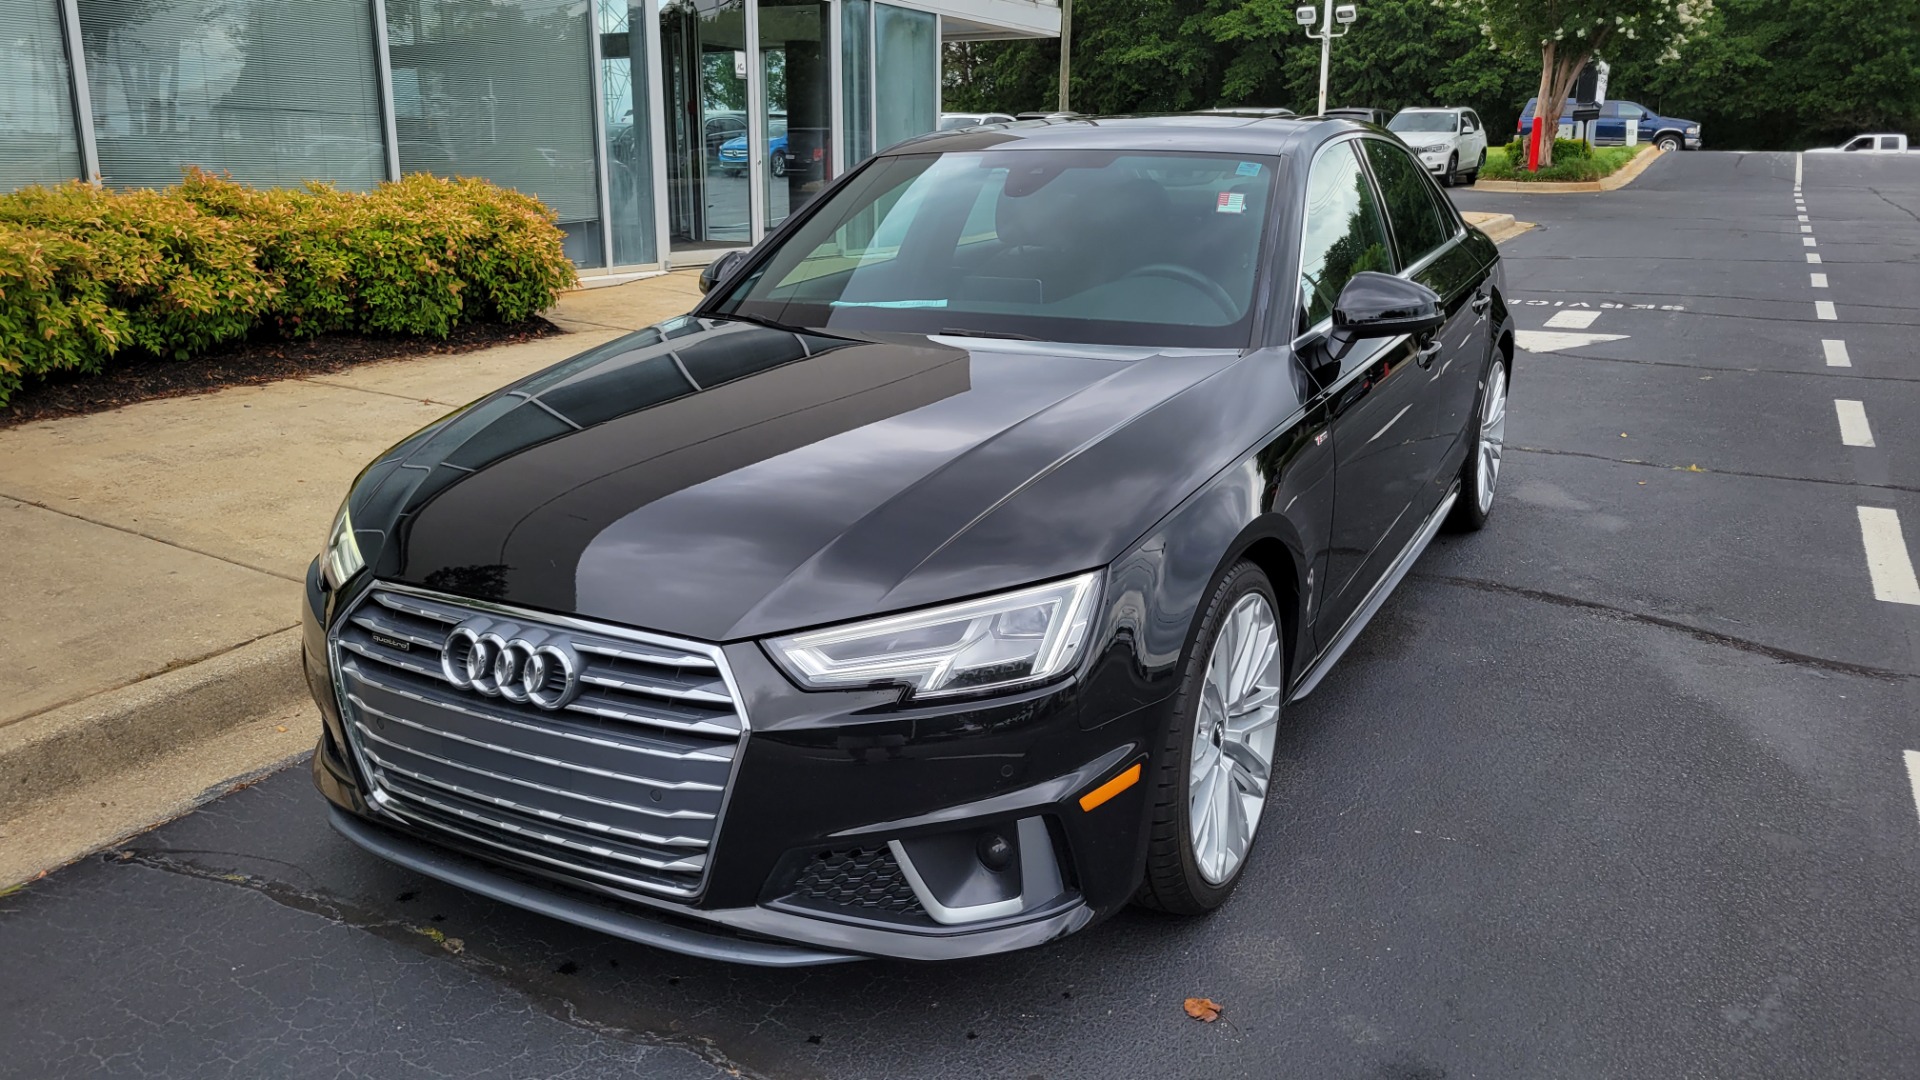 Used 2019 Audi A4 PREMIUM PLUS QUATTRO / SPORT / NAV / SUNROOF / REARVIEW for sale $37,495 at Formula Imports in Charlotte NC 28227 2